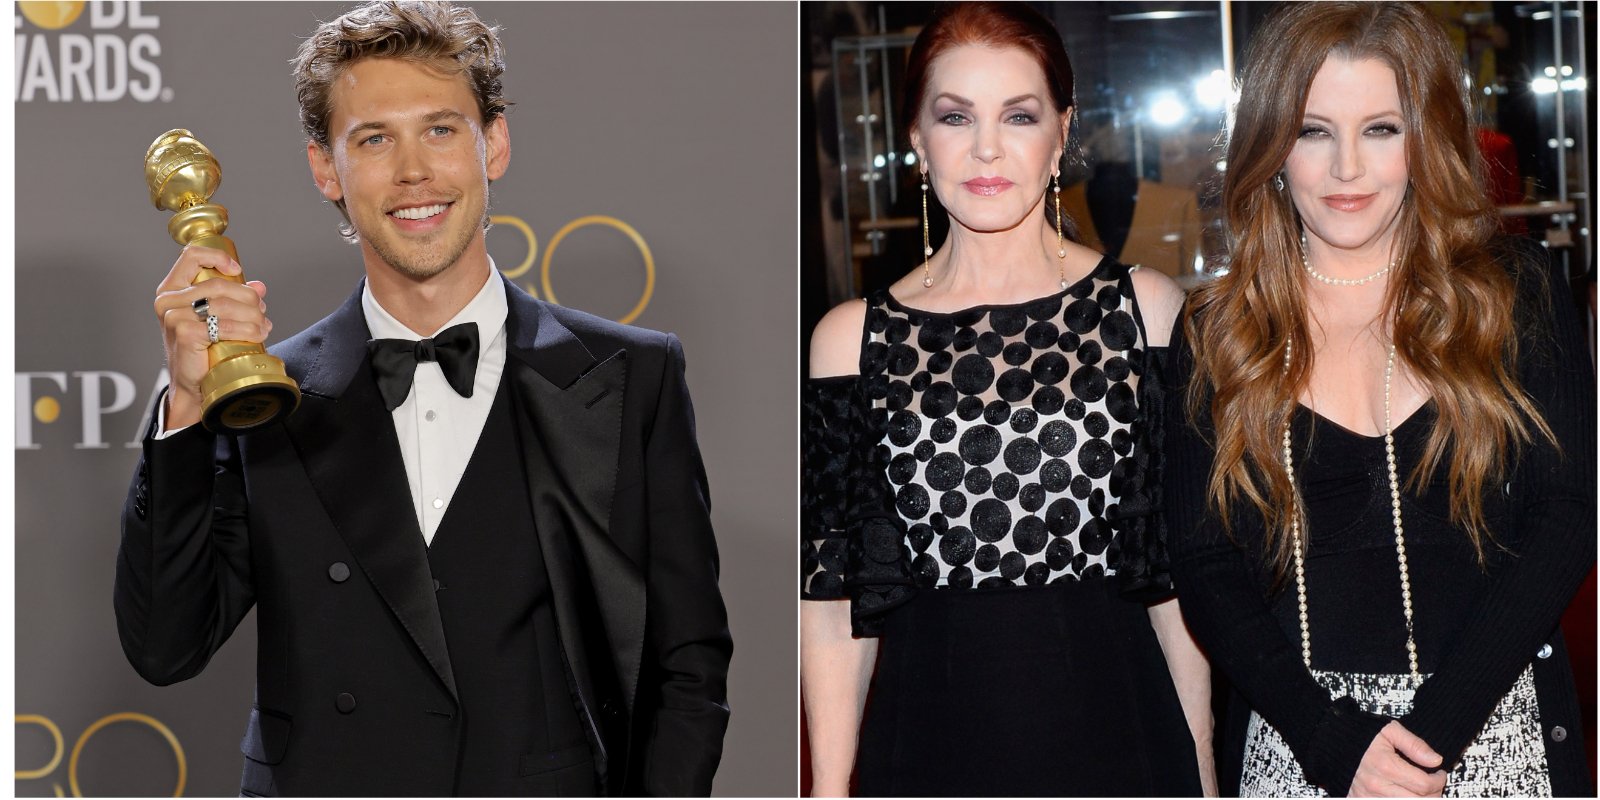 Austin Butler, Priscilla Presley and Lisa Marie Presley in side by side photographs.